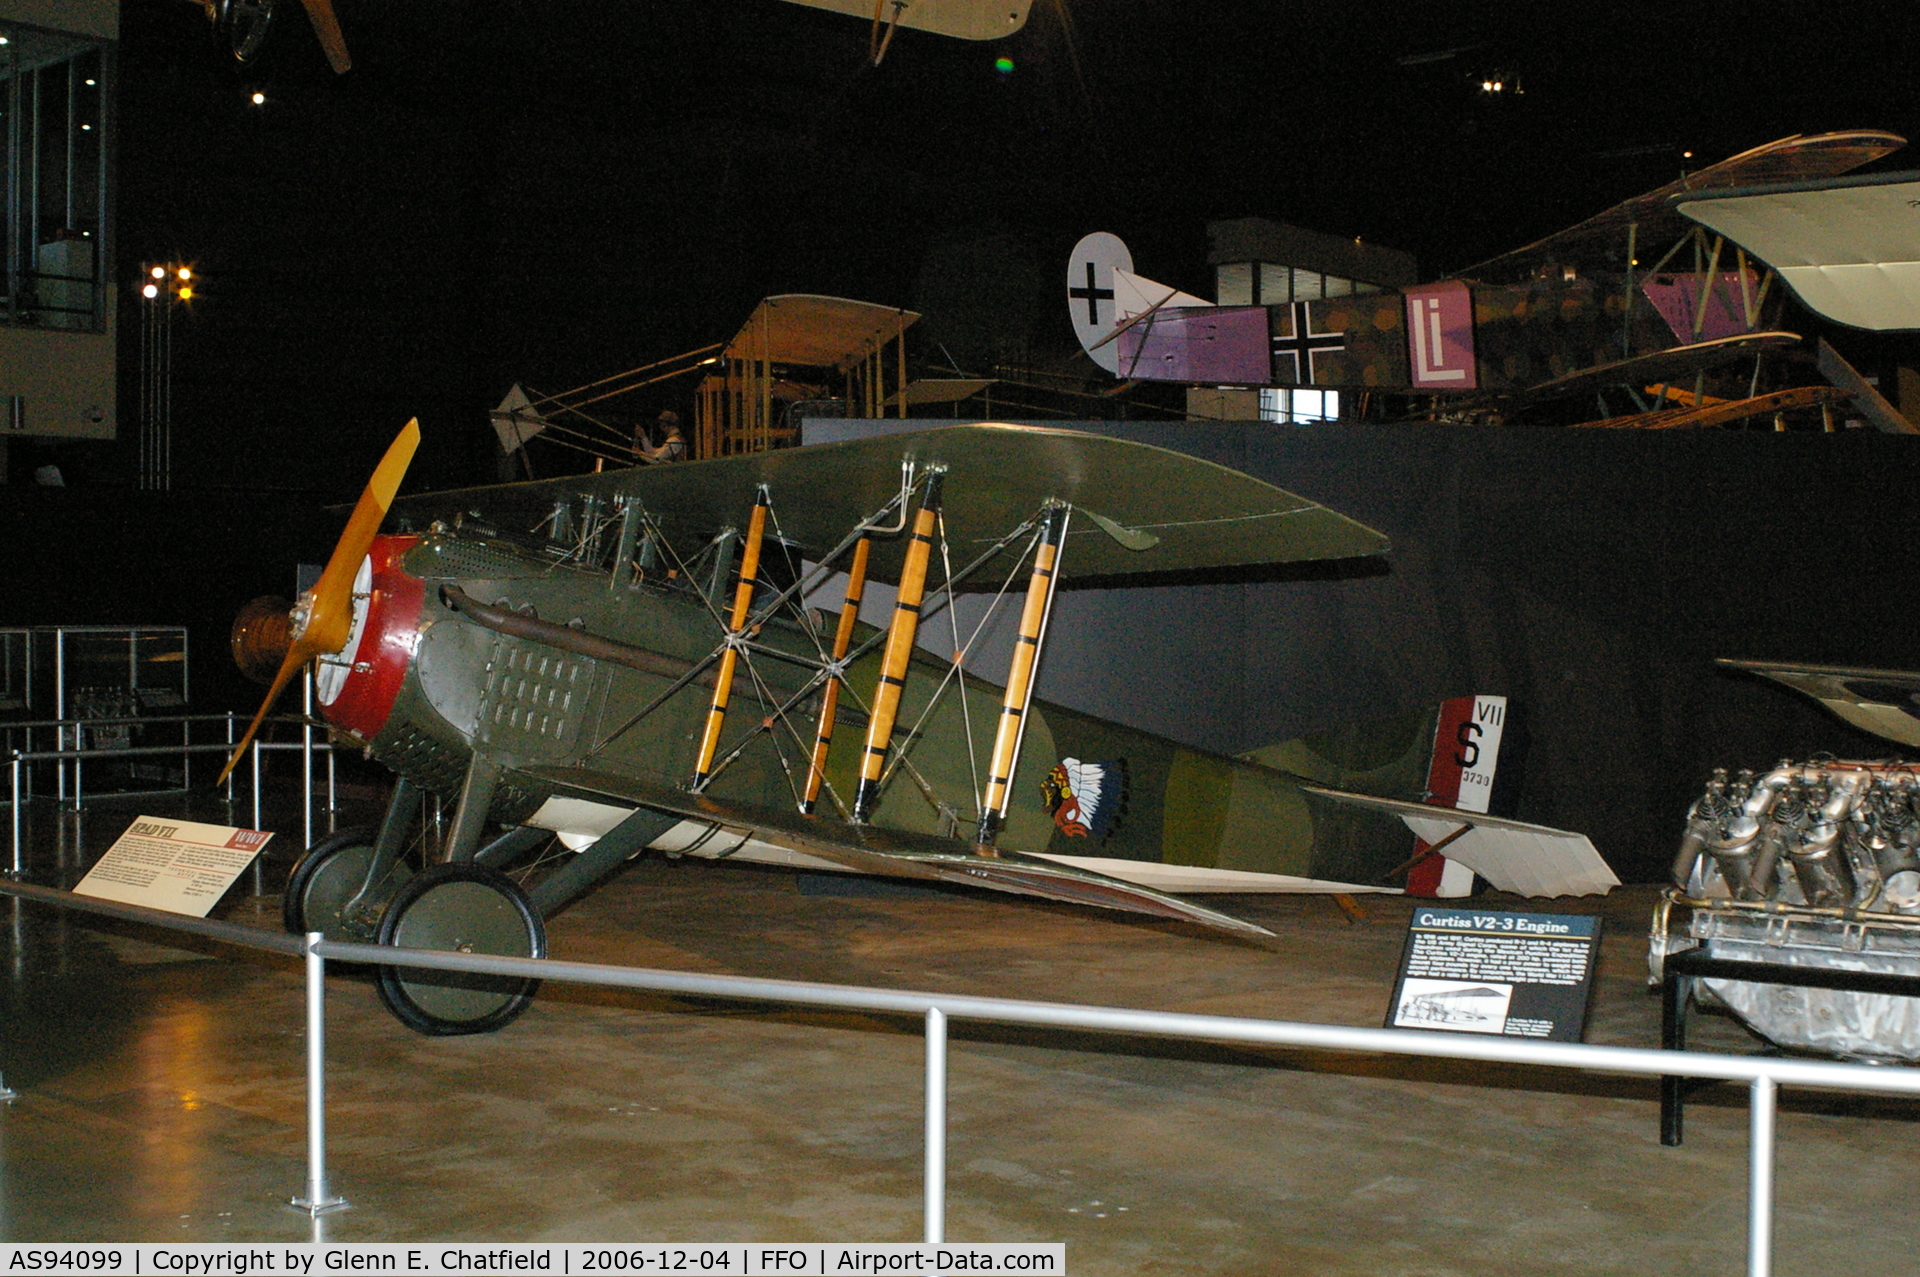 AS94099, SPAD S-VII C/N Not found AS94099, SPAD VII at the National Museum of the U.S. Air Force